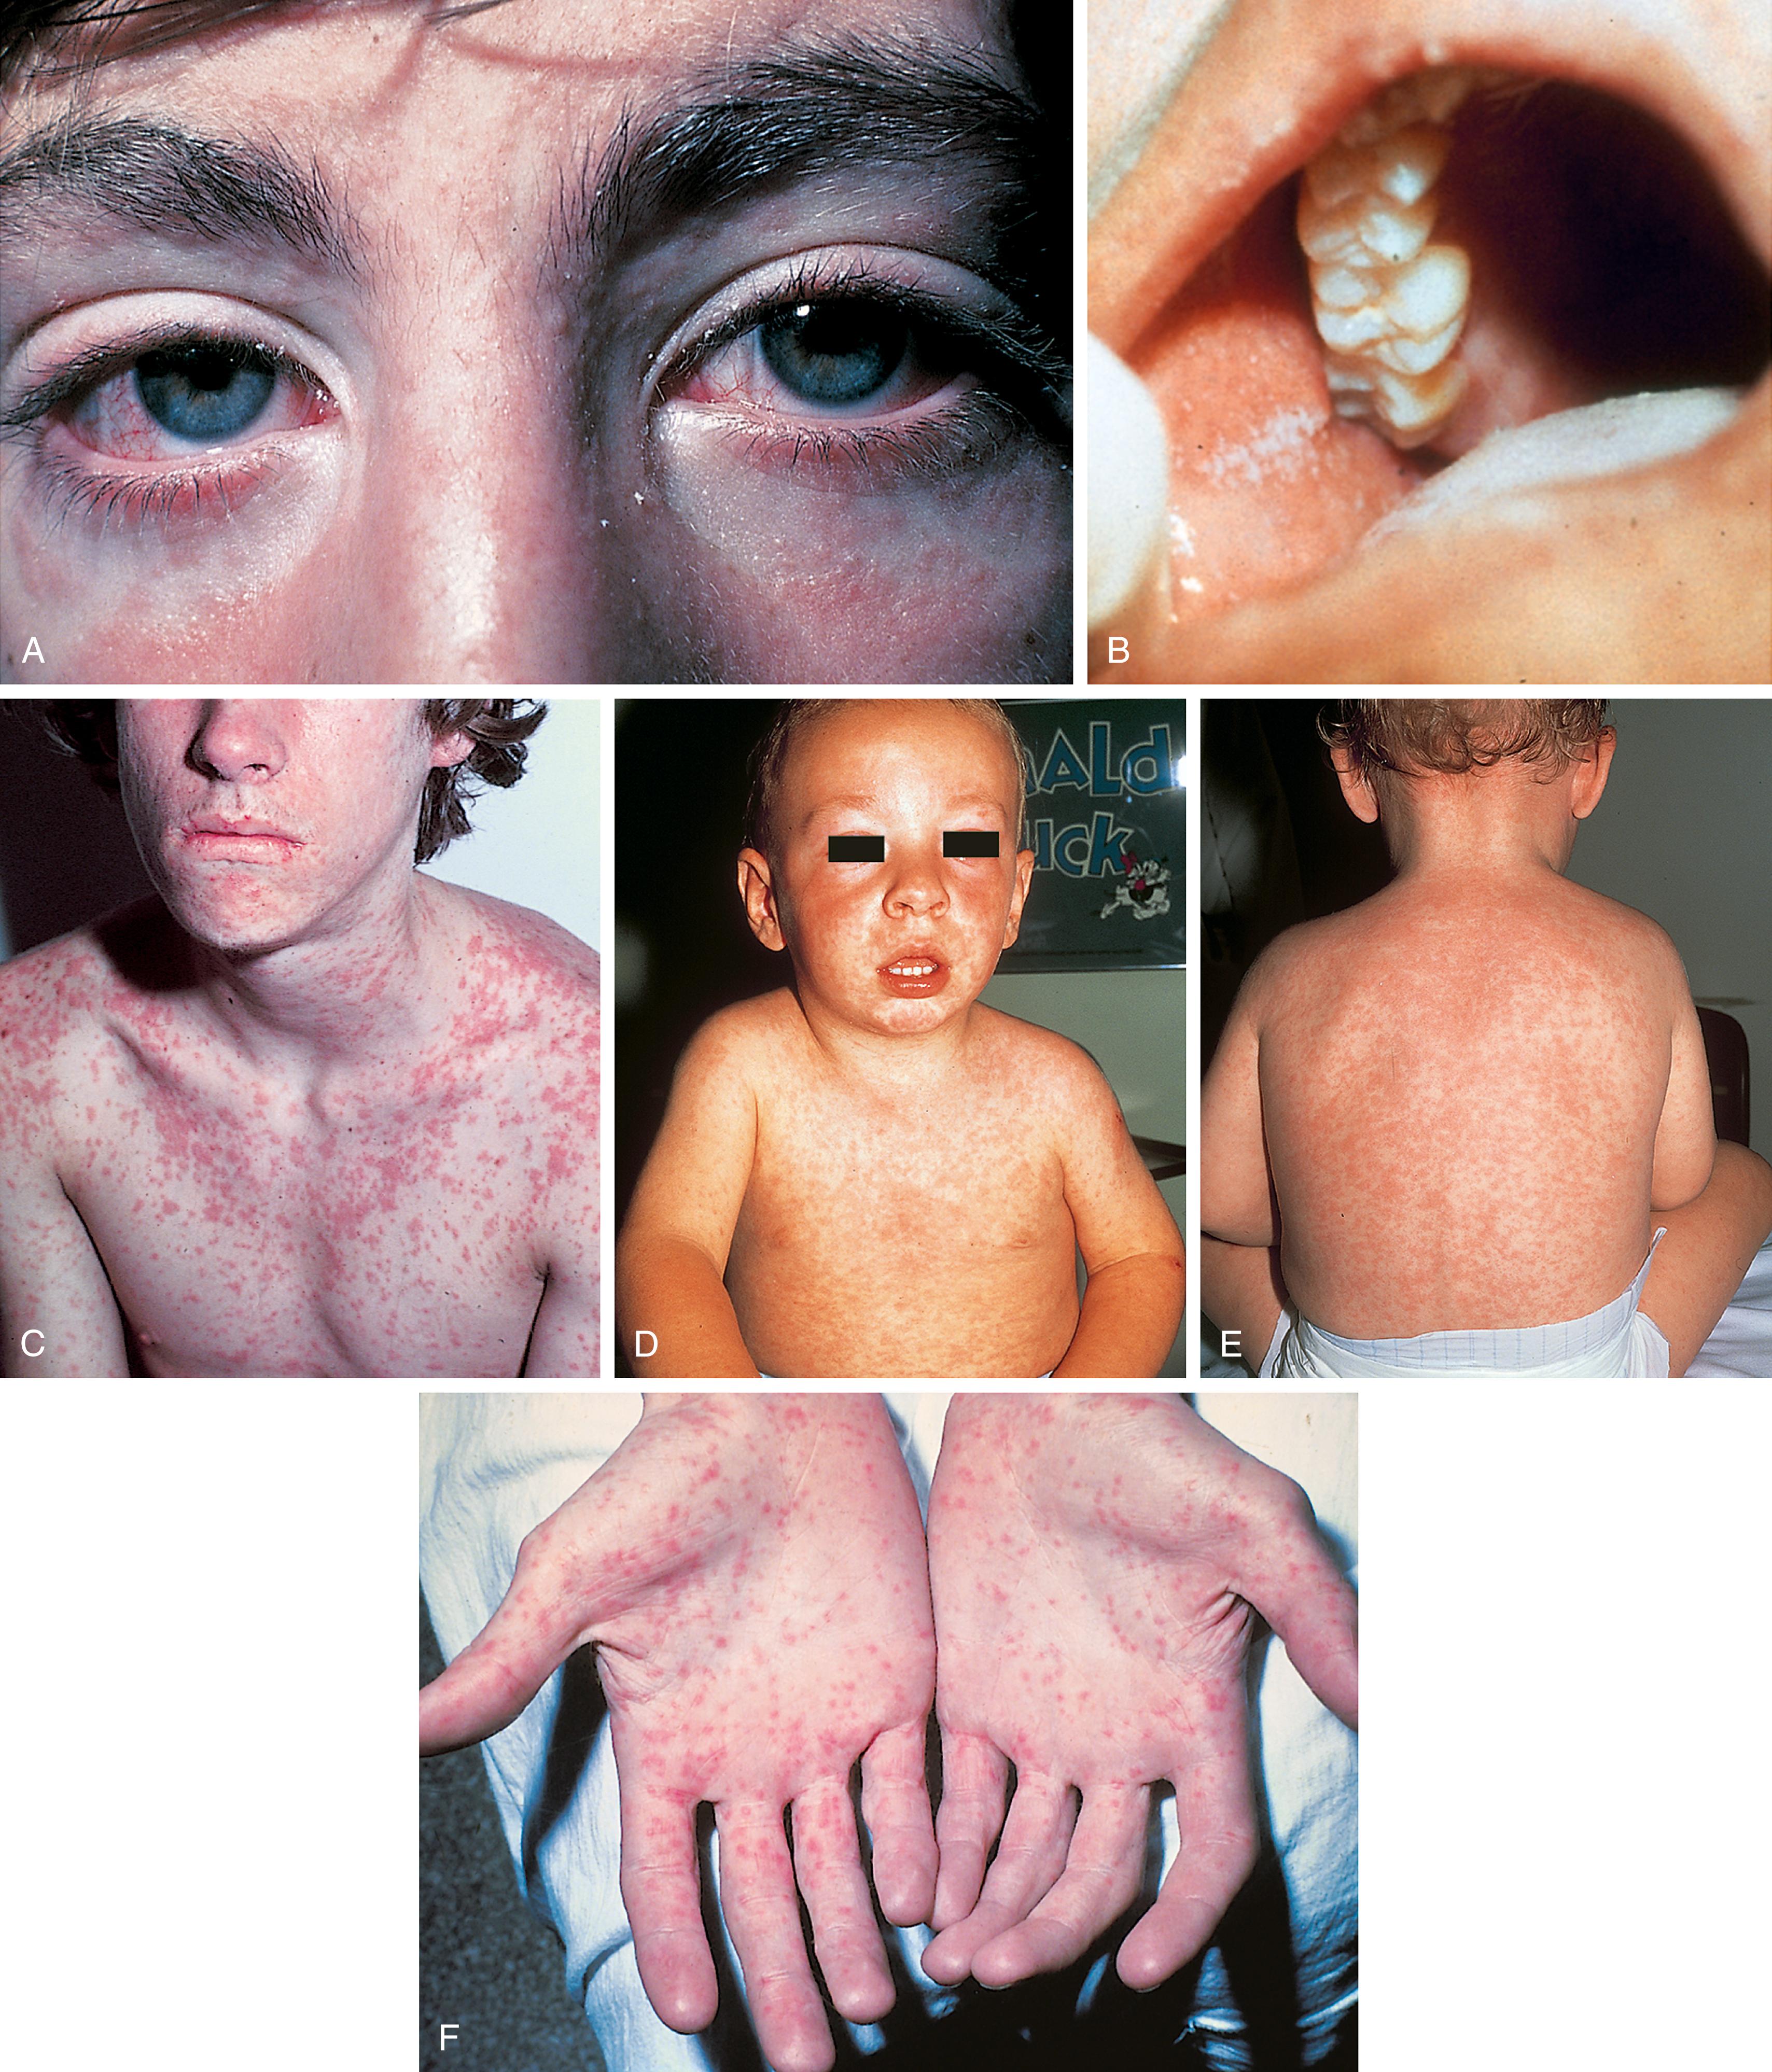 Fig. 13.9, Rubeola/measles. (A) During and after the prodromal period, the conjunctivae are injected and produce a clear discharge. This is associated with marked photophobia. (B) Koplik spots, bluish white dots surrounded by red halos, appear on the buccal and labial mucosa 1 or 2 days before the exanthem and begin to fade with onset of the rash. (C–E) The measles exanthem is a blotchy, erythematous, blanching maculopapular eruption that appears at the hairline and spreads cephalocaudally over 3 days, ultimately involving the palms and soles (F). With evolution, lesions become confluent at proximal sites.